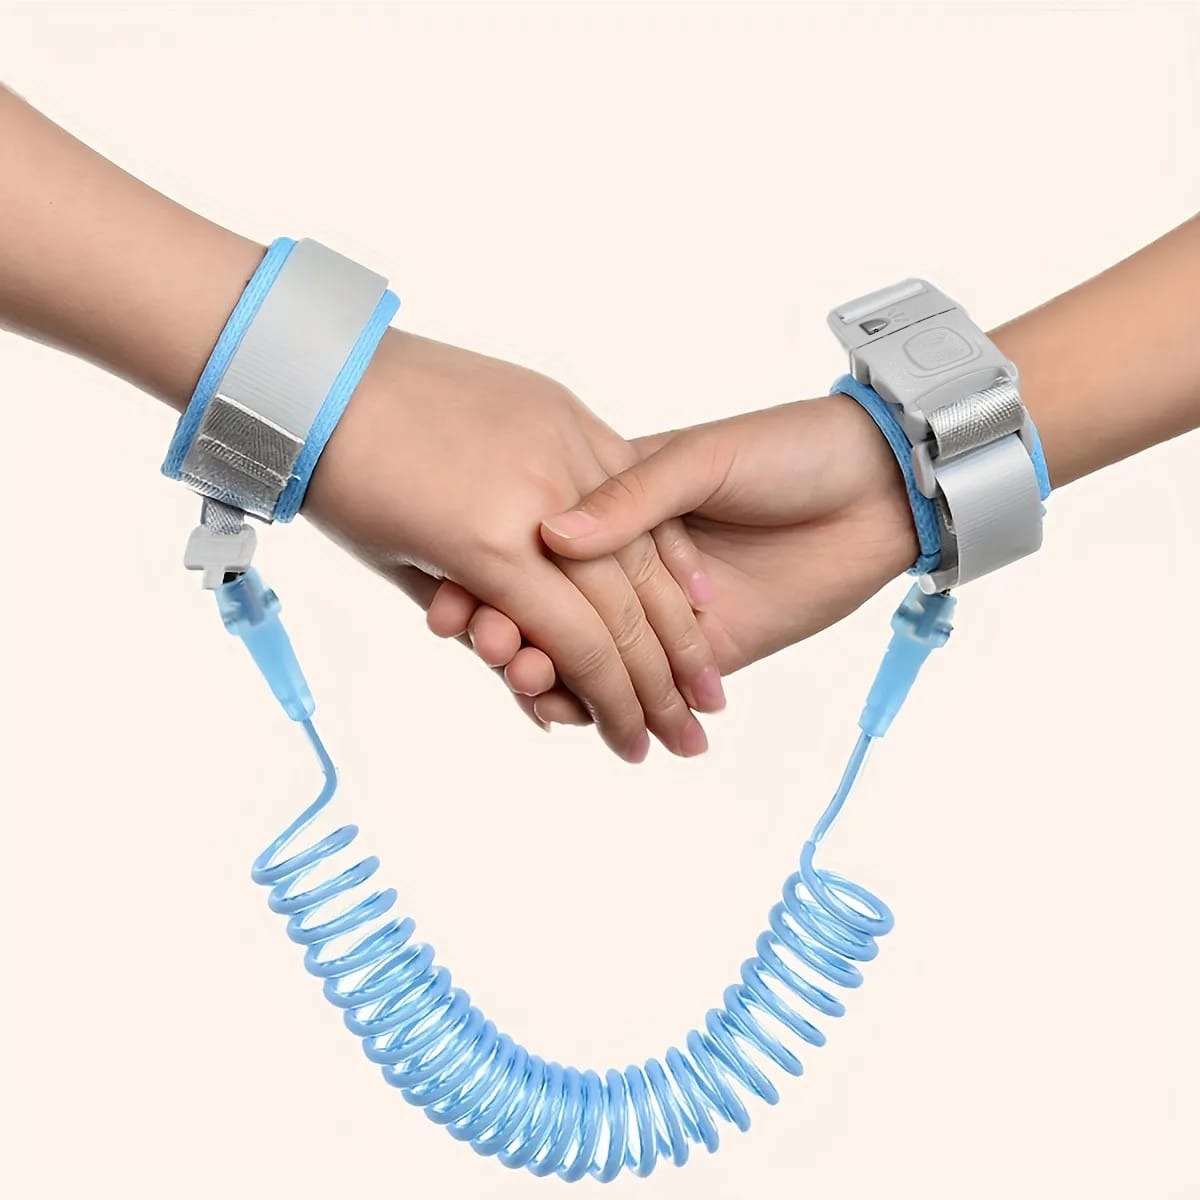 Hands tied with Blue Child Safety Harness Leash holding each other